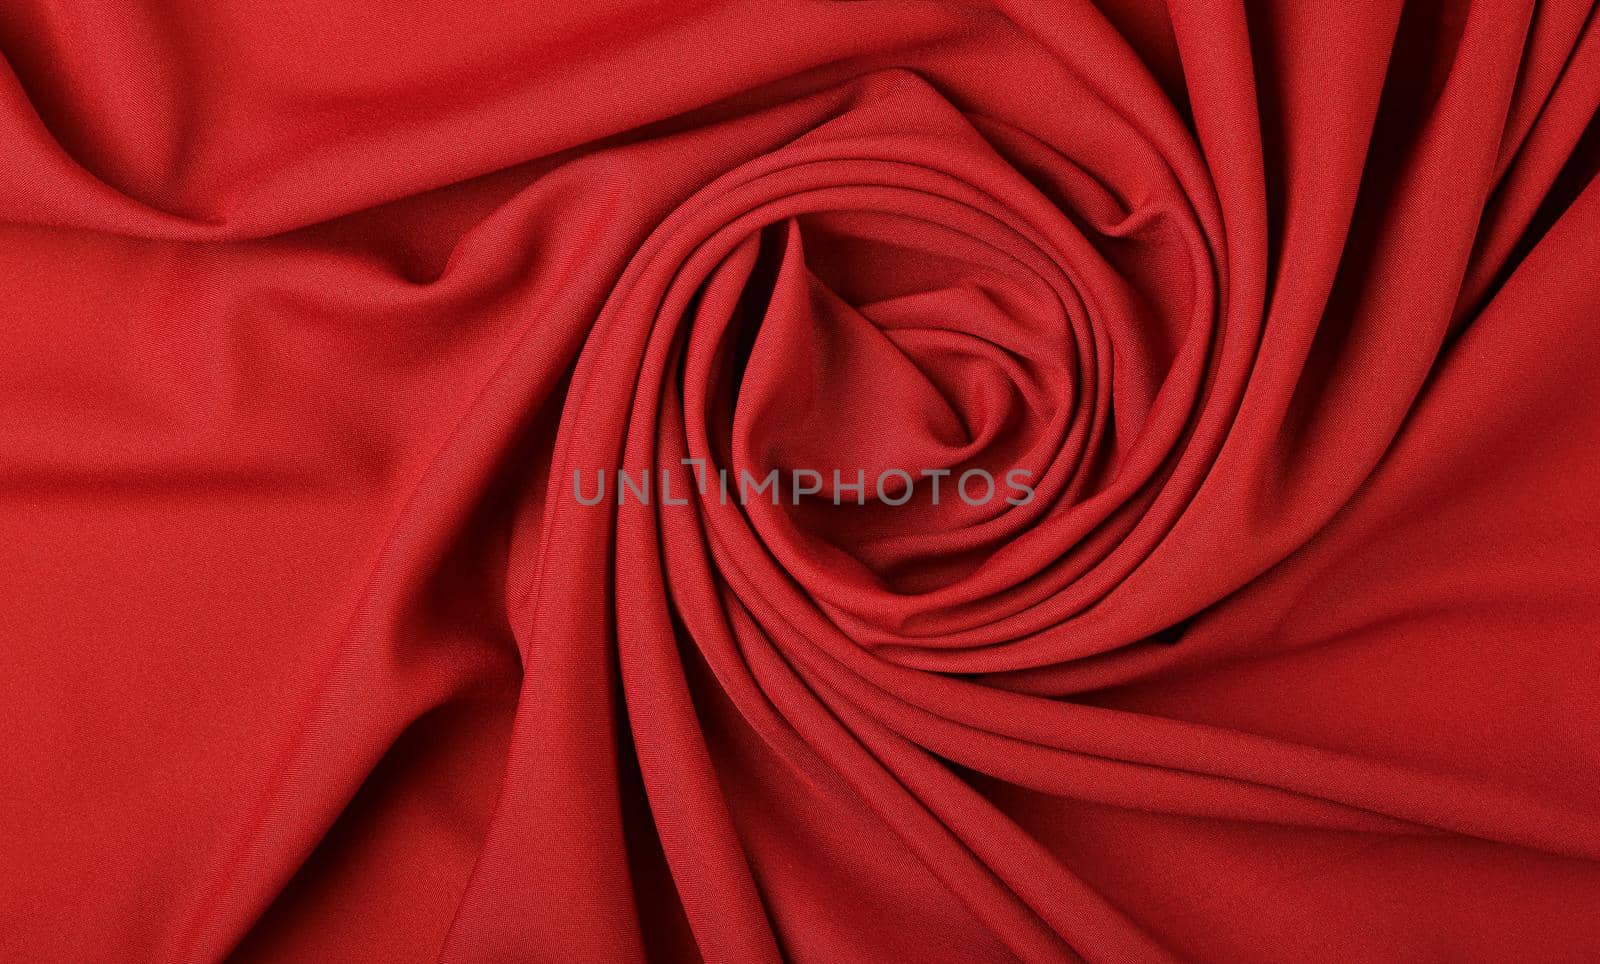 Close up abstract textile background of spiral shaped red folded pleats of fabric, elevated top view, directly above